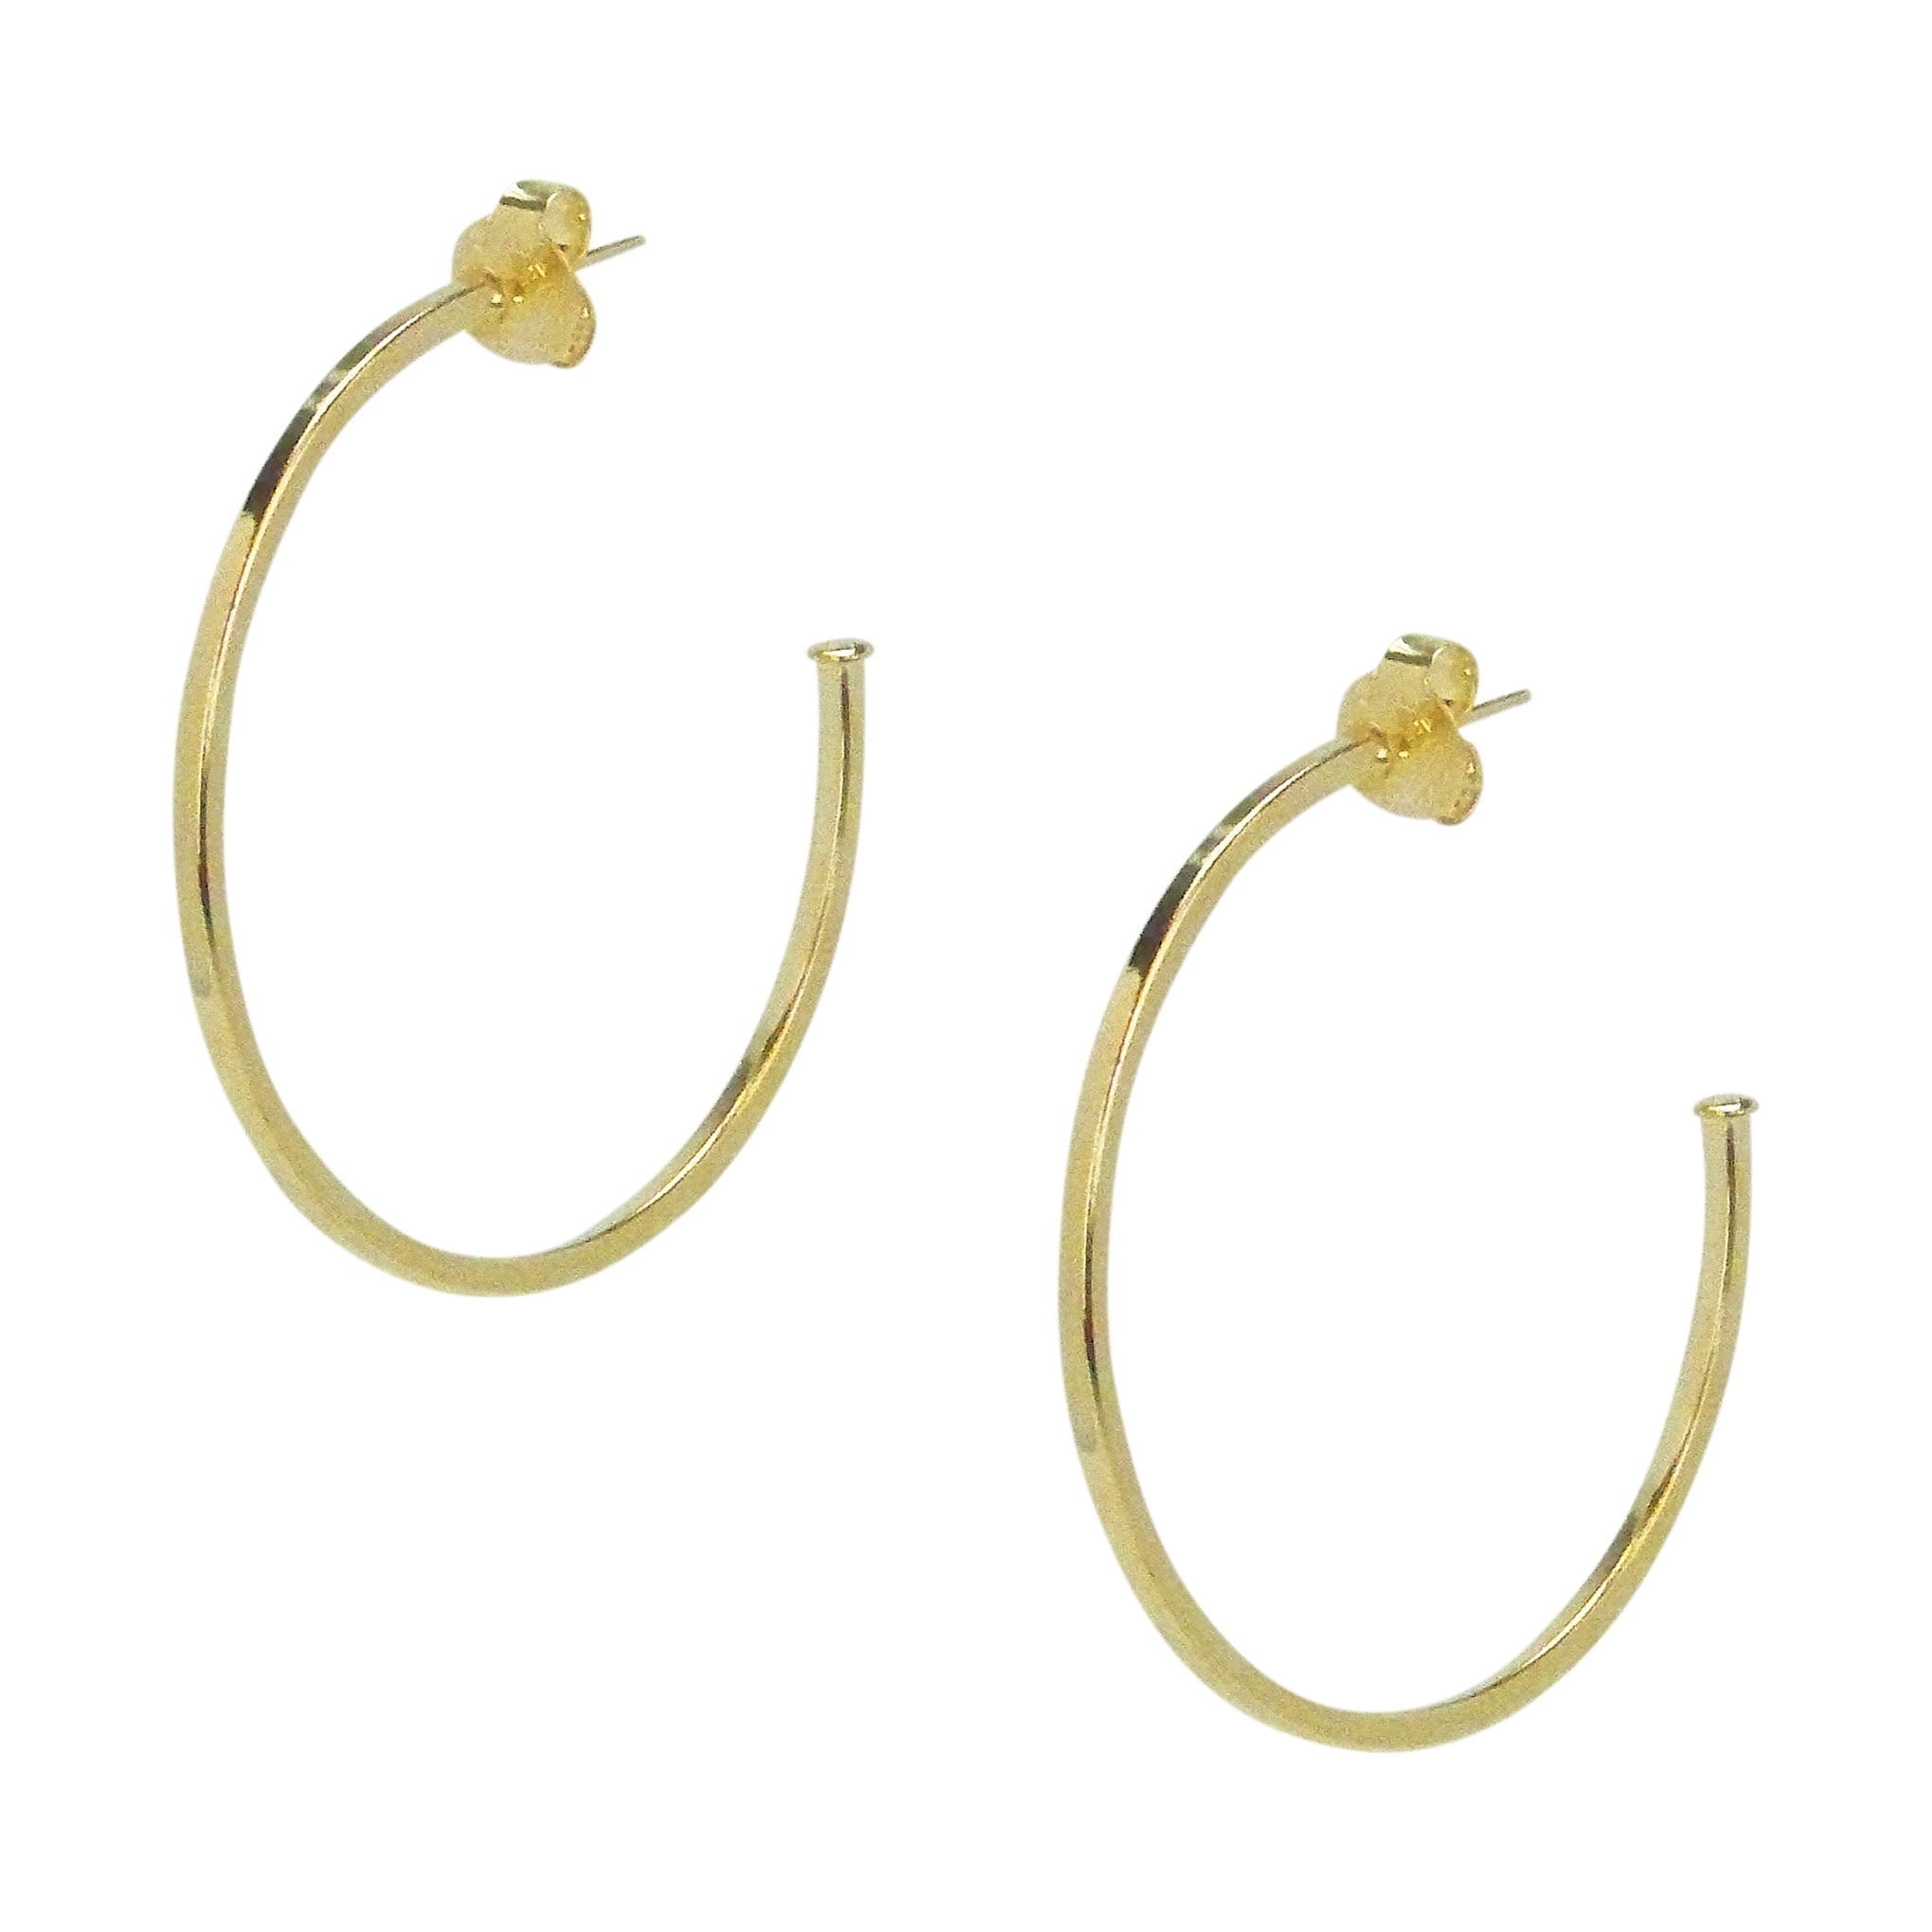 image of Sheila Fajl Perfect Hoop Earrings in Polished Champagne